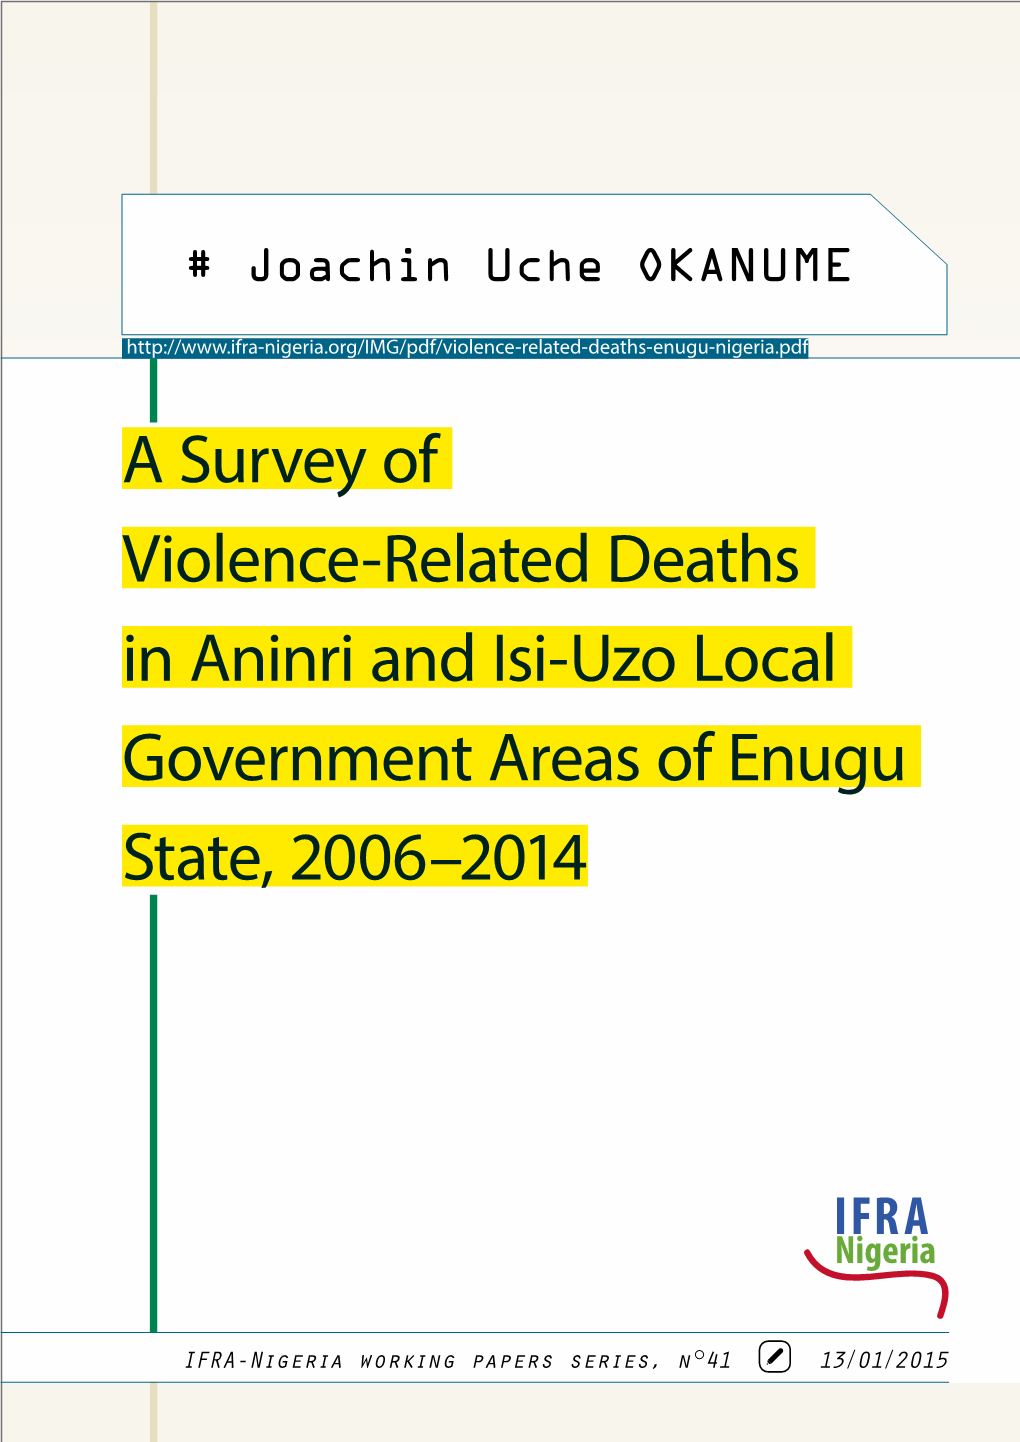 A Survey of Violence-Related Deaths in Aninri and Isi-Uzo Local Government Areas of Enugu State, 2006–2014